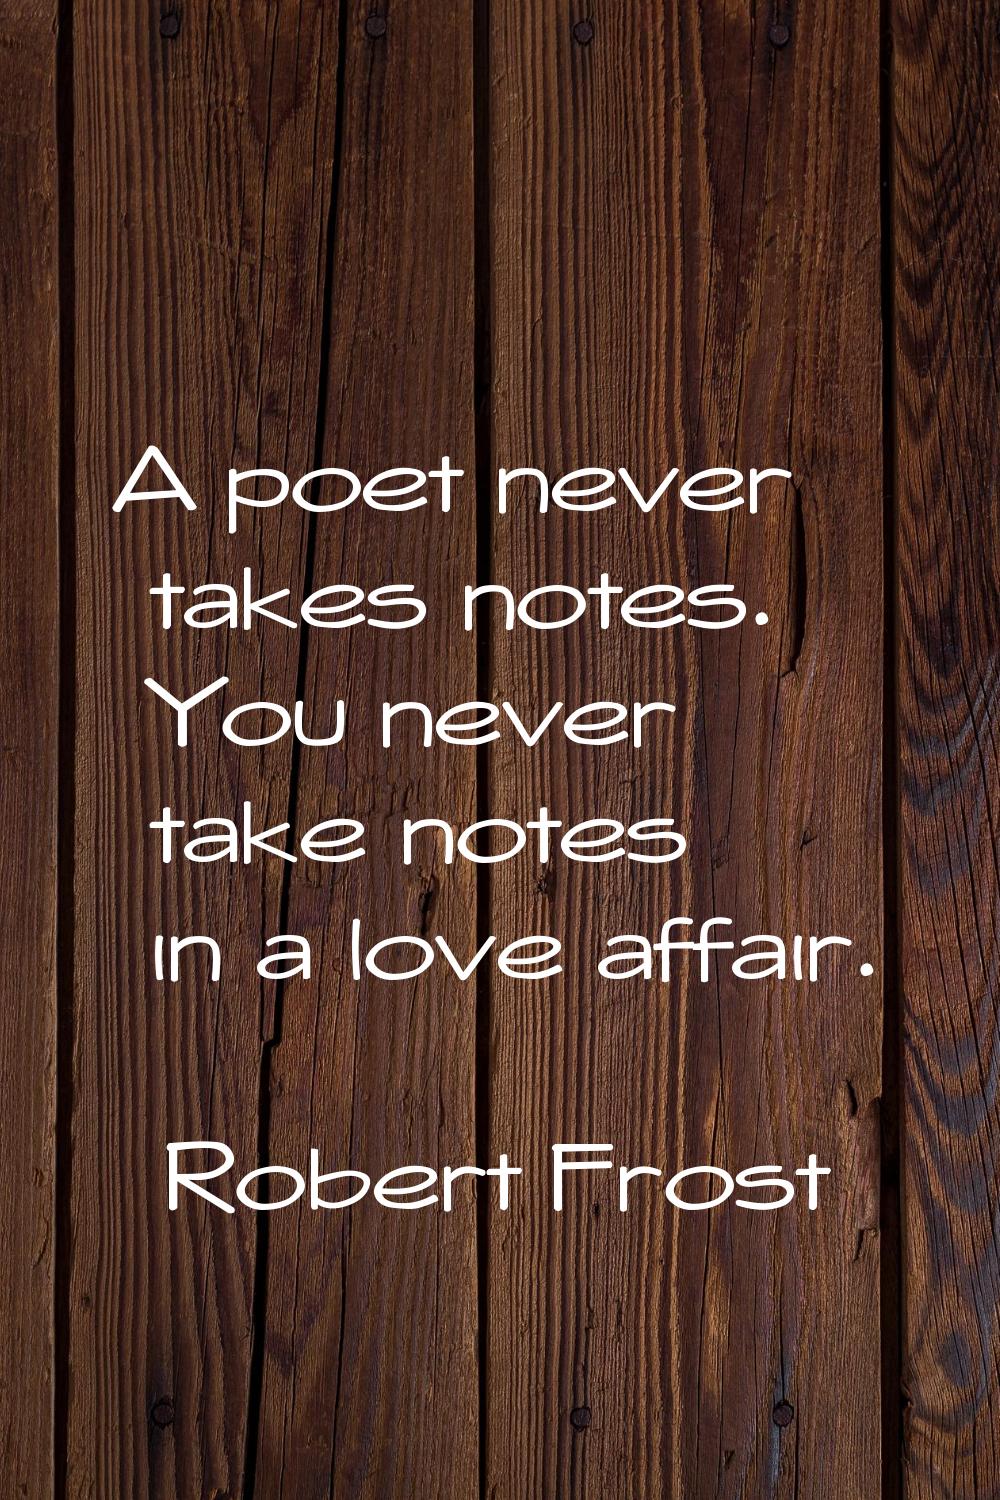 A poet never takes notes. You never take notes in a love affair.